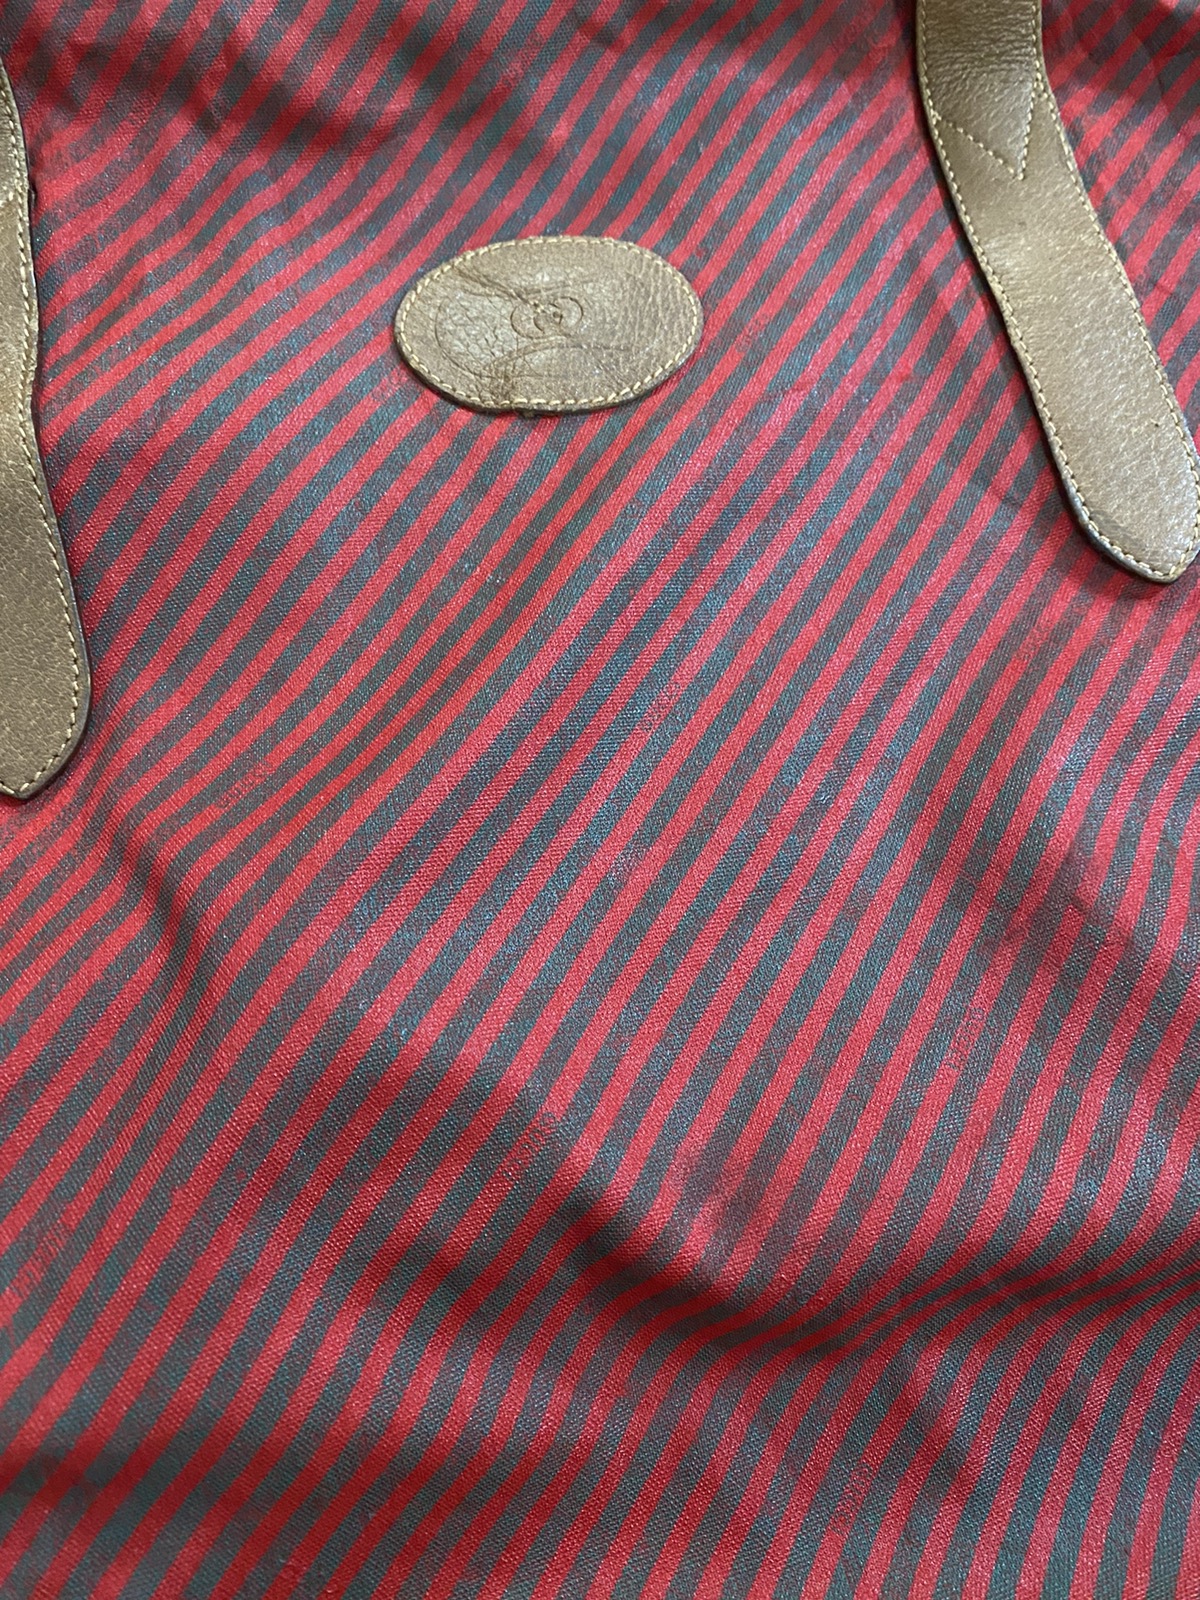 Vintage GUCCI Accessory Collection Striped Travel Duffle Bag - 6